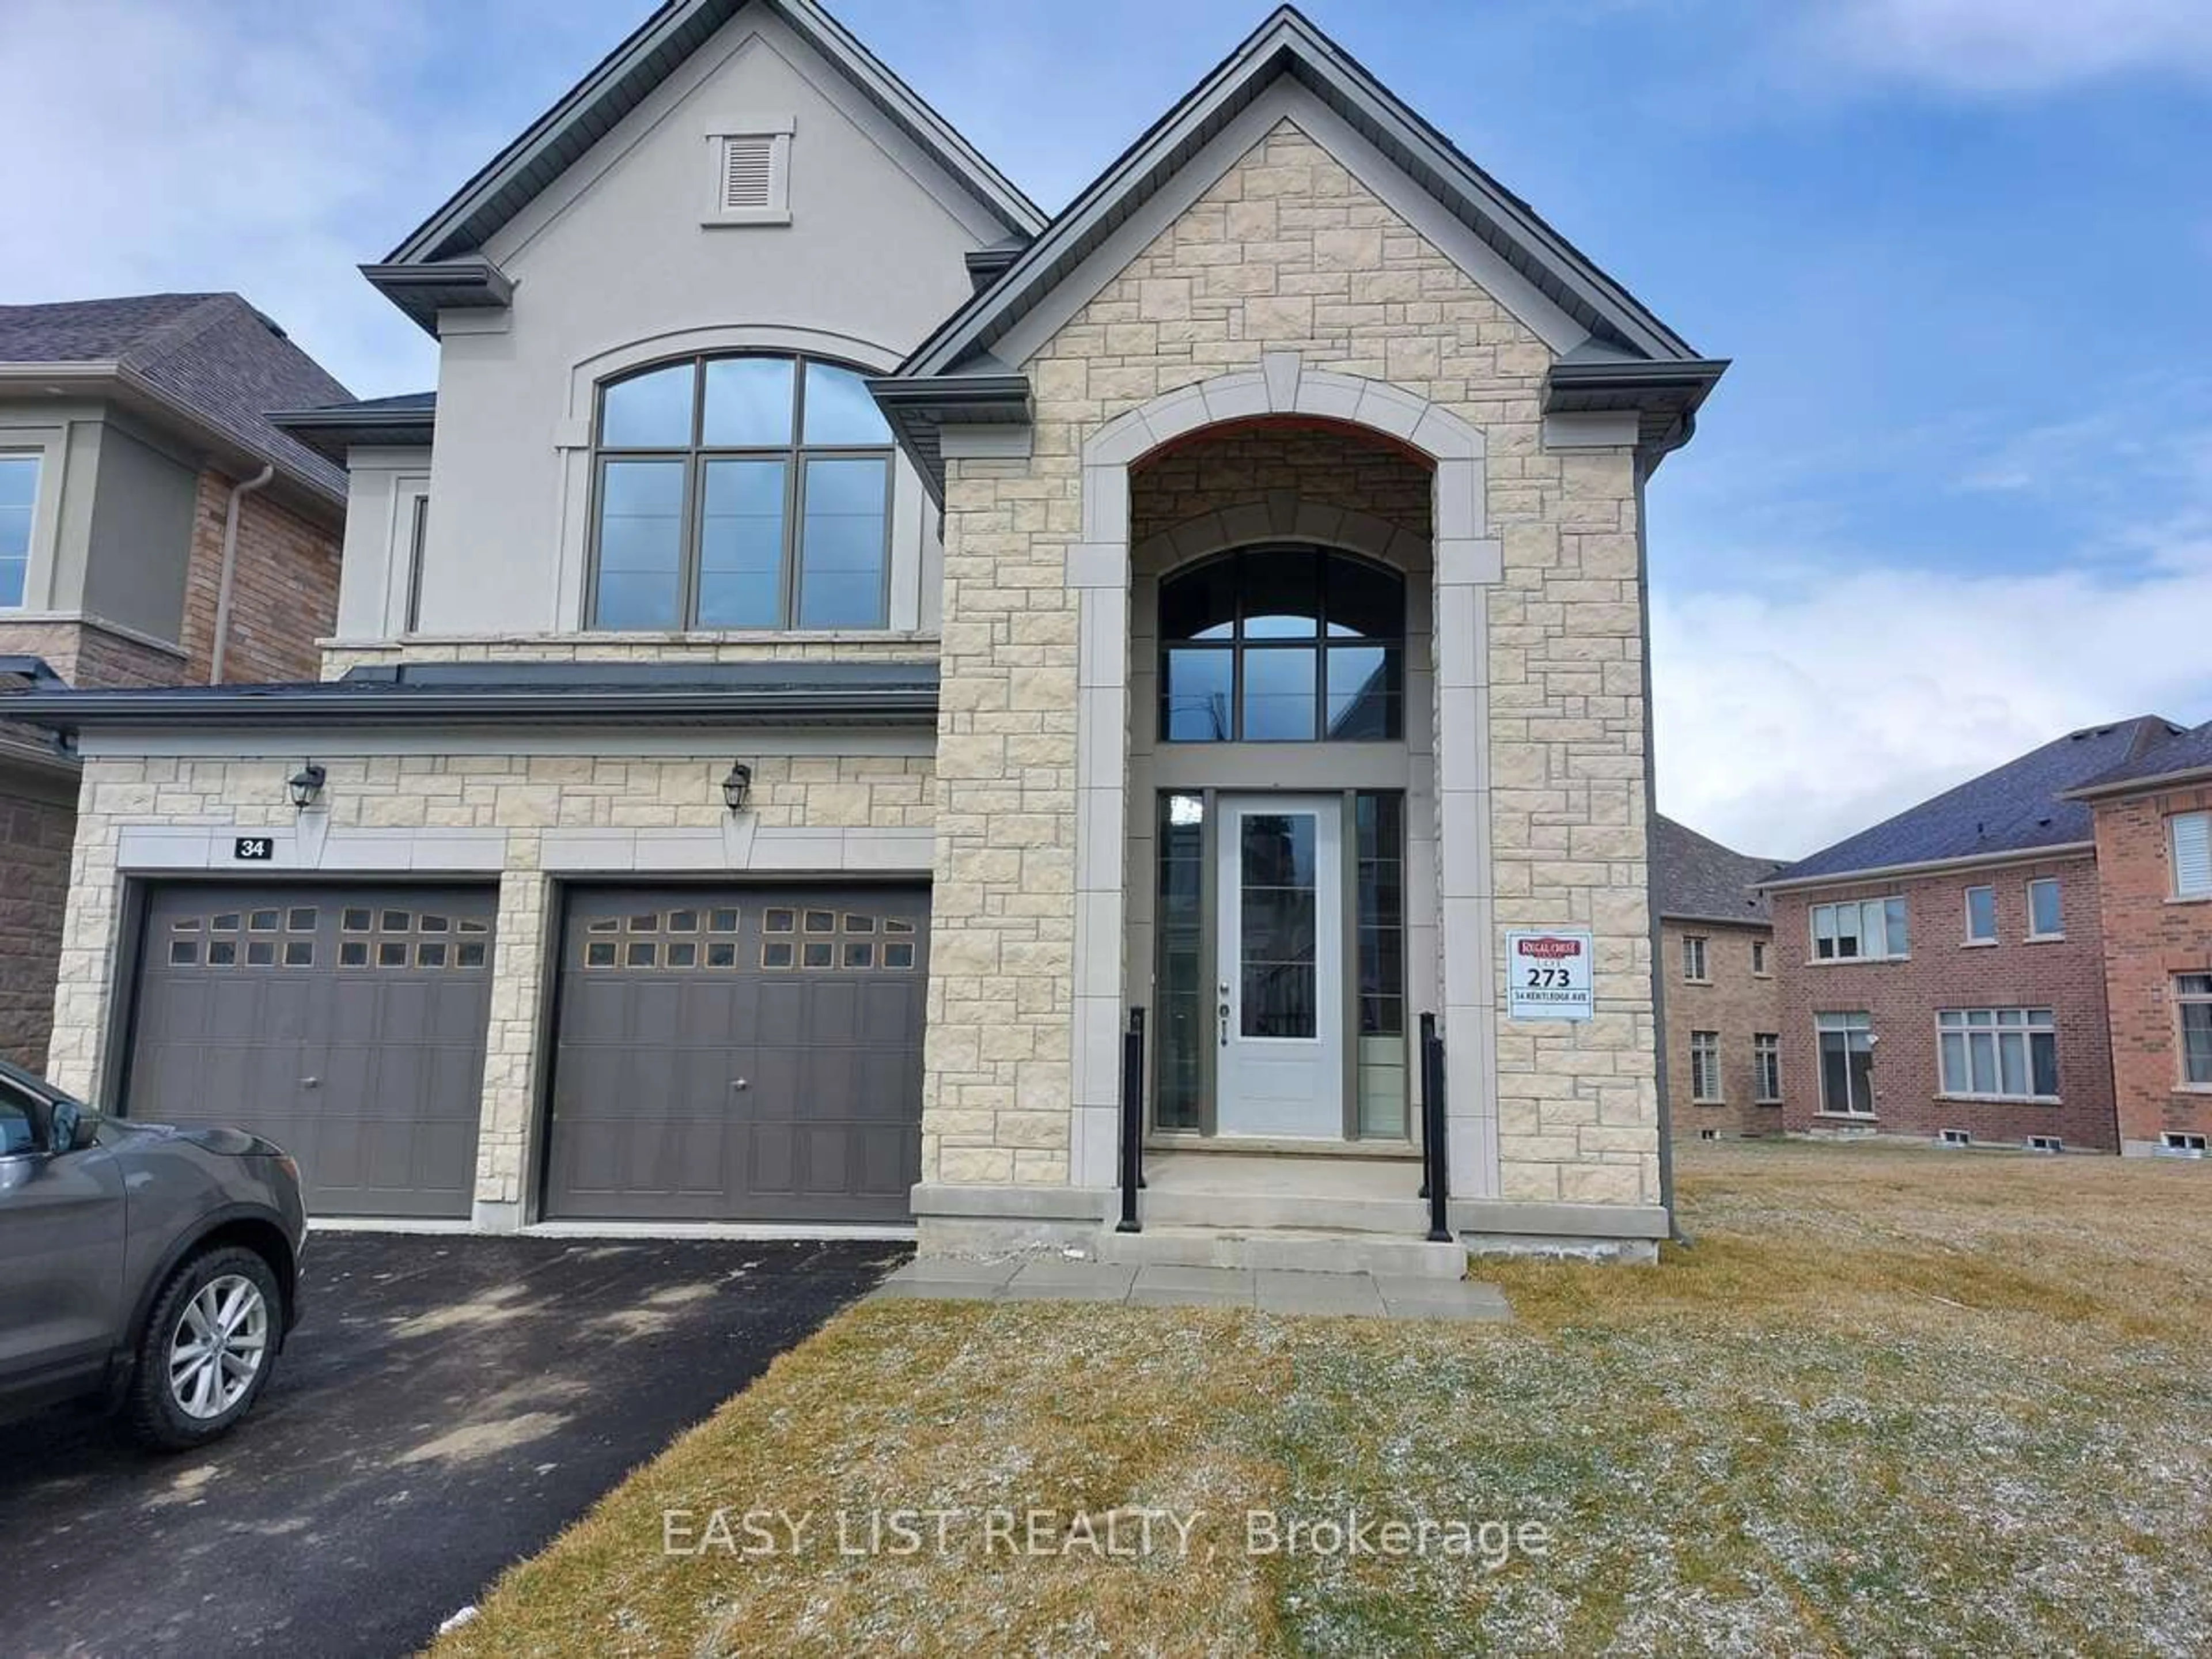 Home with brick exterior material for 34 Kentledge Ave, East Gwillimbury Ontario L9N 0W3